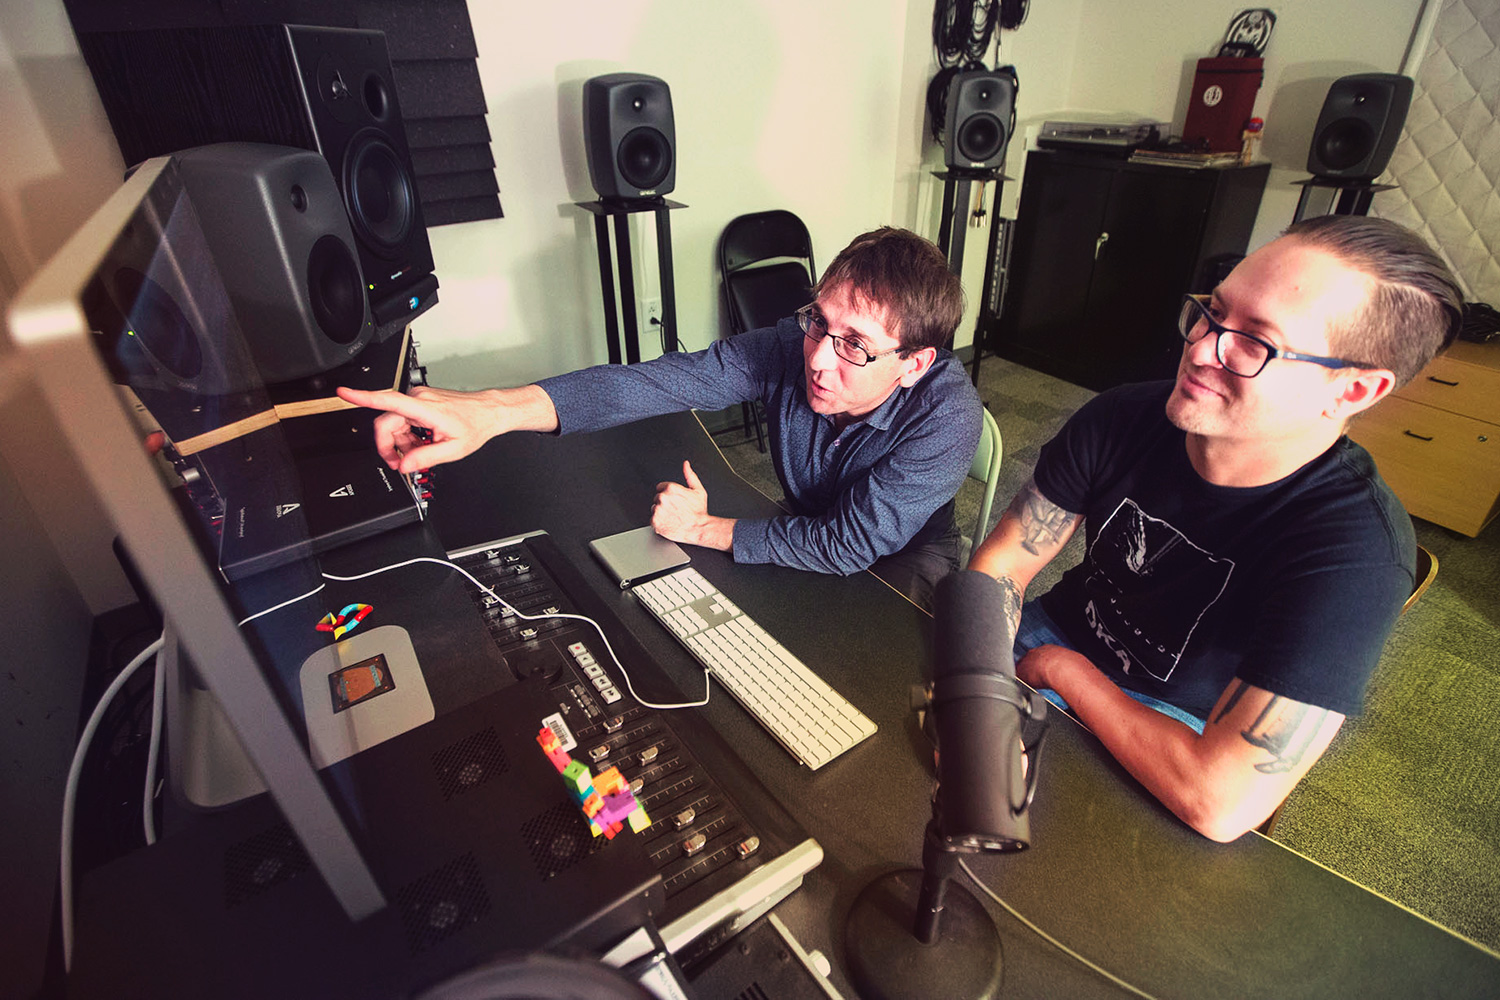 Noel Lobley and Travis Thatcher work together on a computer